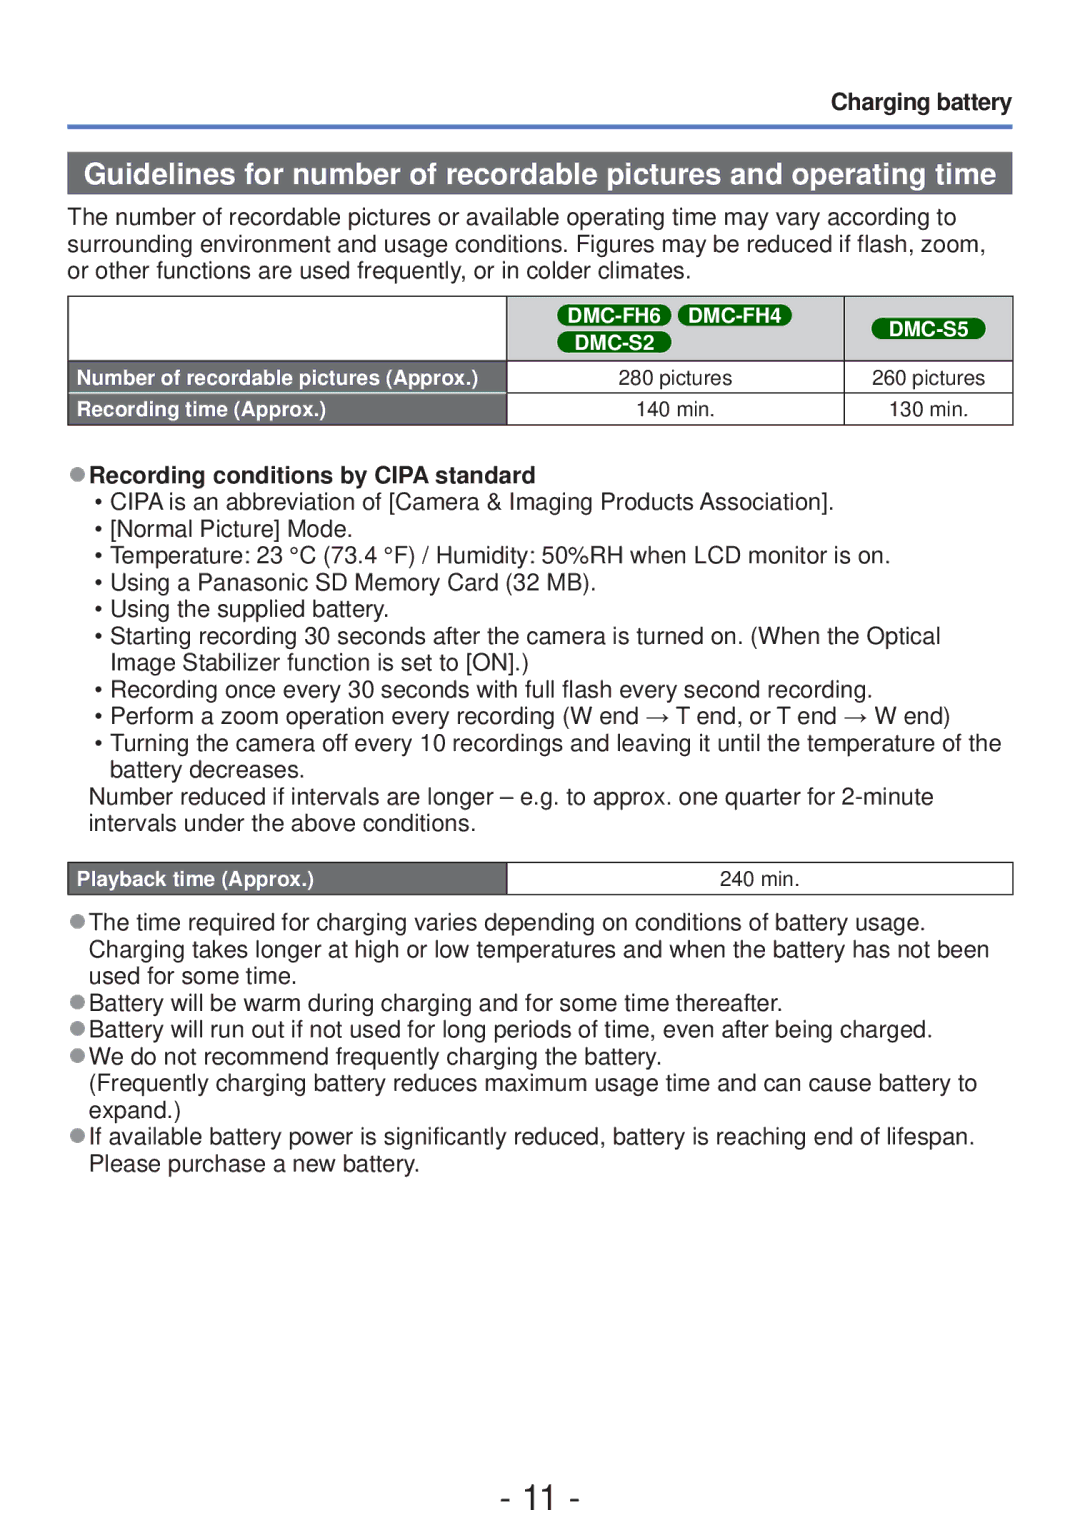 Panasonic DMC-S5, DMC-FH4 owner manual Charging battery, Recording conditions by Cipa standard, Pictures, min 130 min 